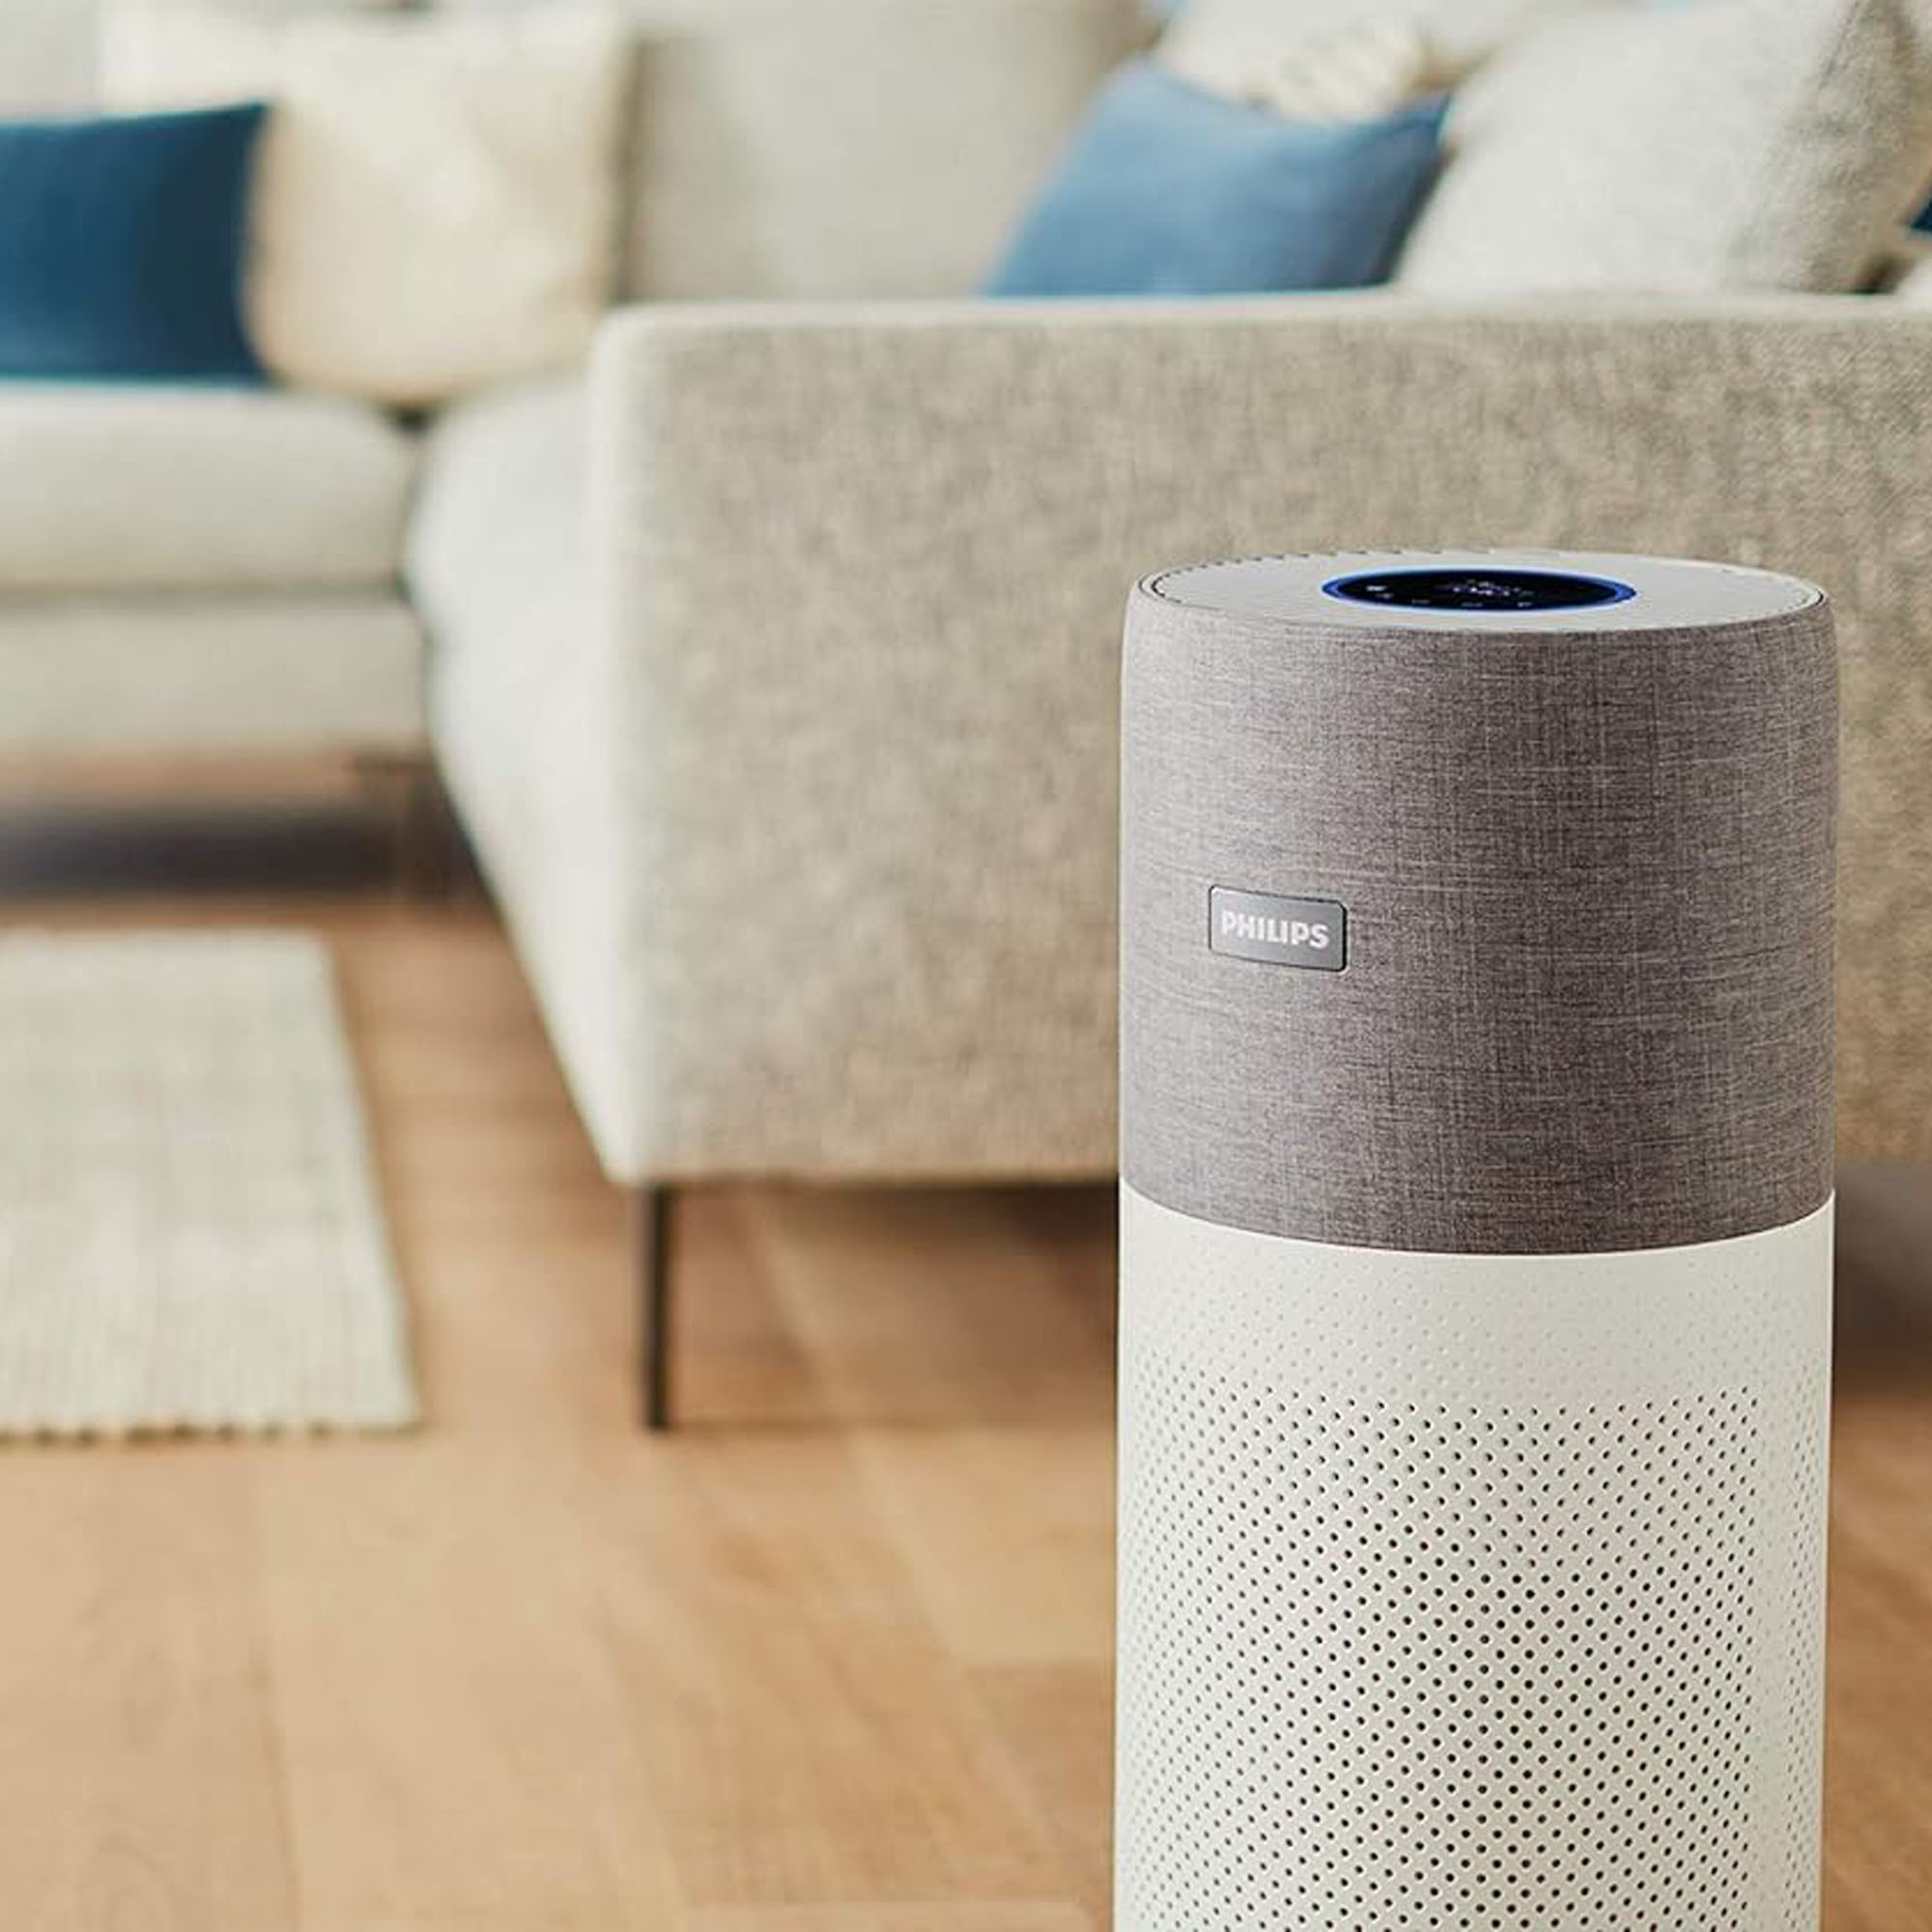 The Philips 3000i Series AC3033/30 Connected Air Purifier in a living room with a wooden floor